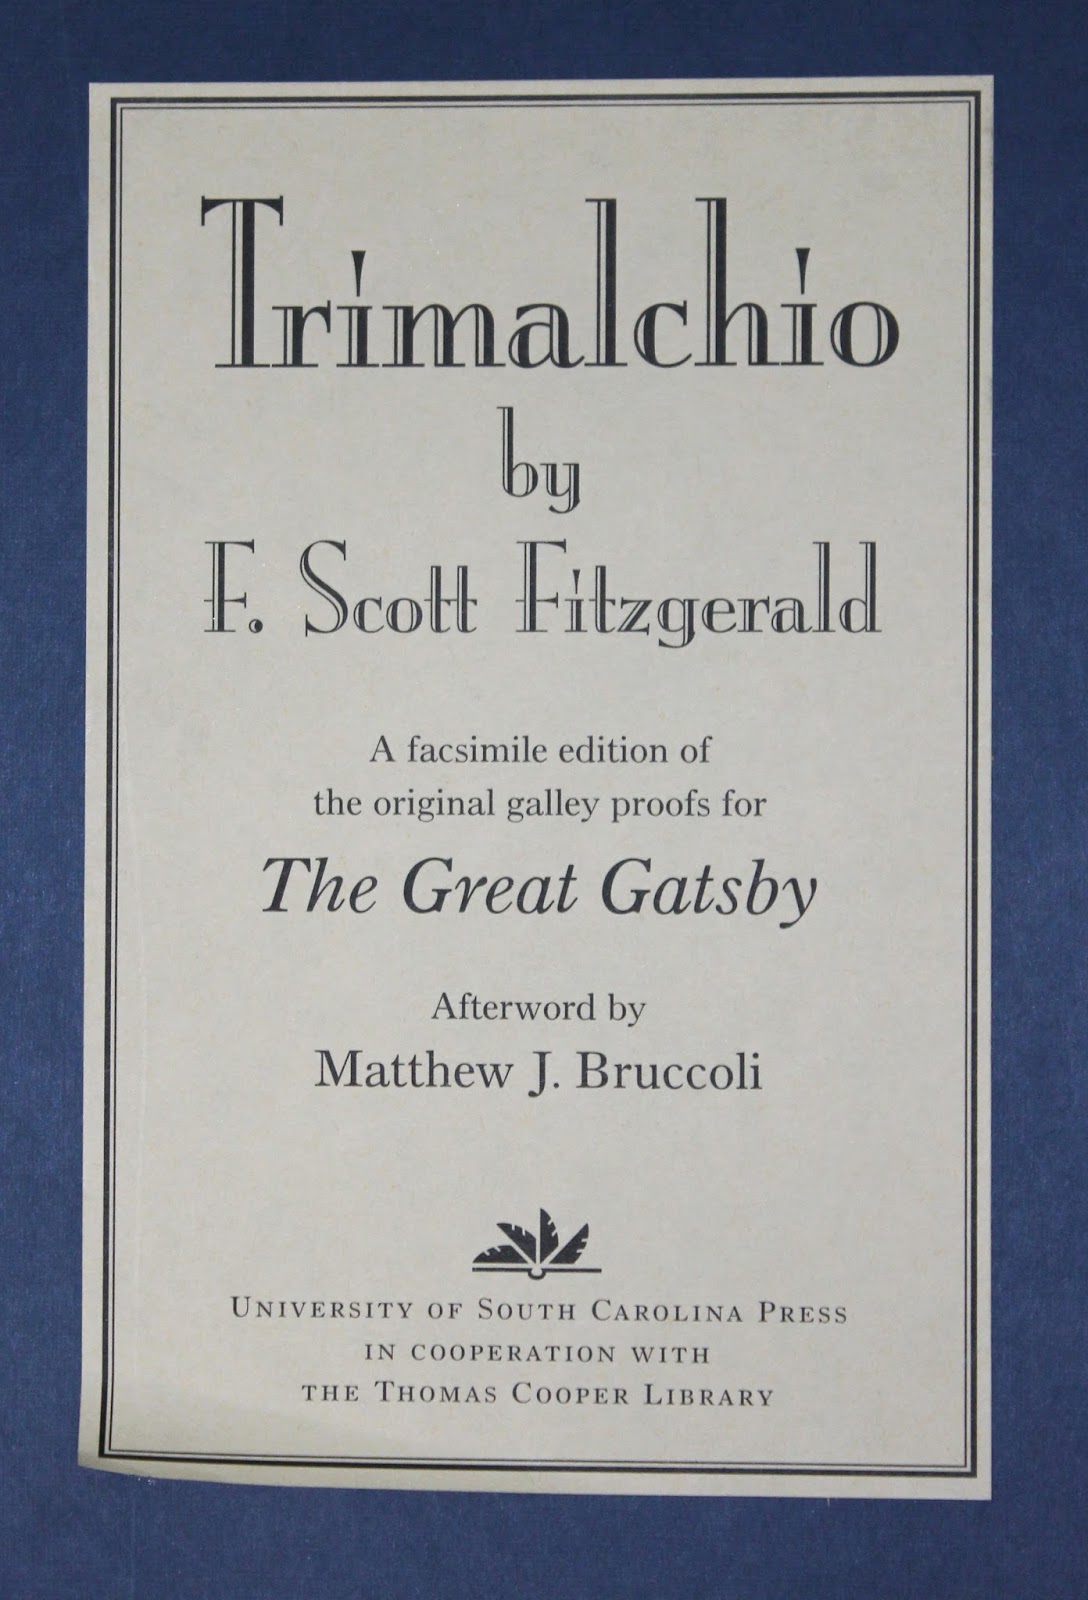 Book cover of 'Trimalchio' by F. Scott Fitzgerald. A facsimile edition of the original galley proofs for The Great Gatsby